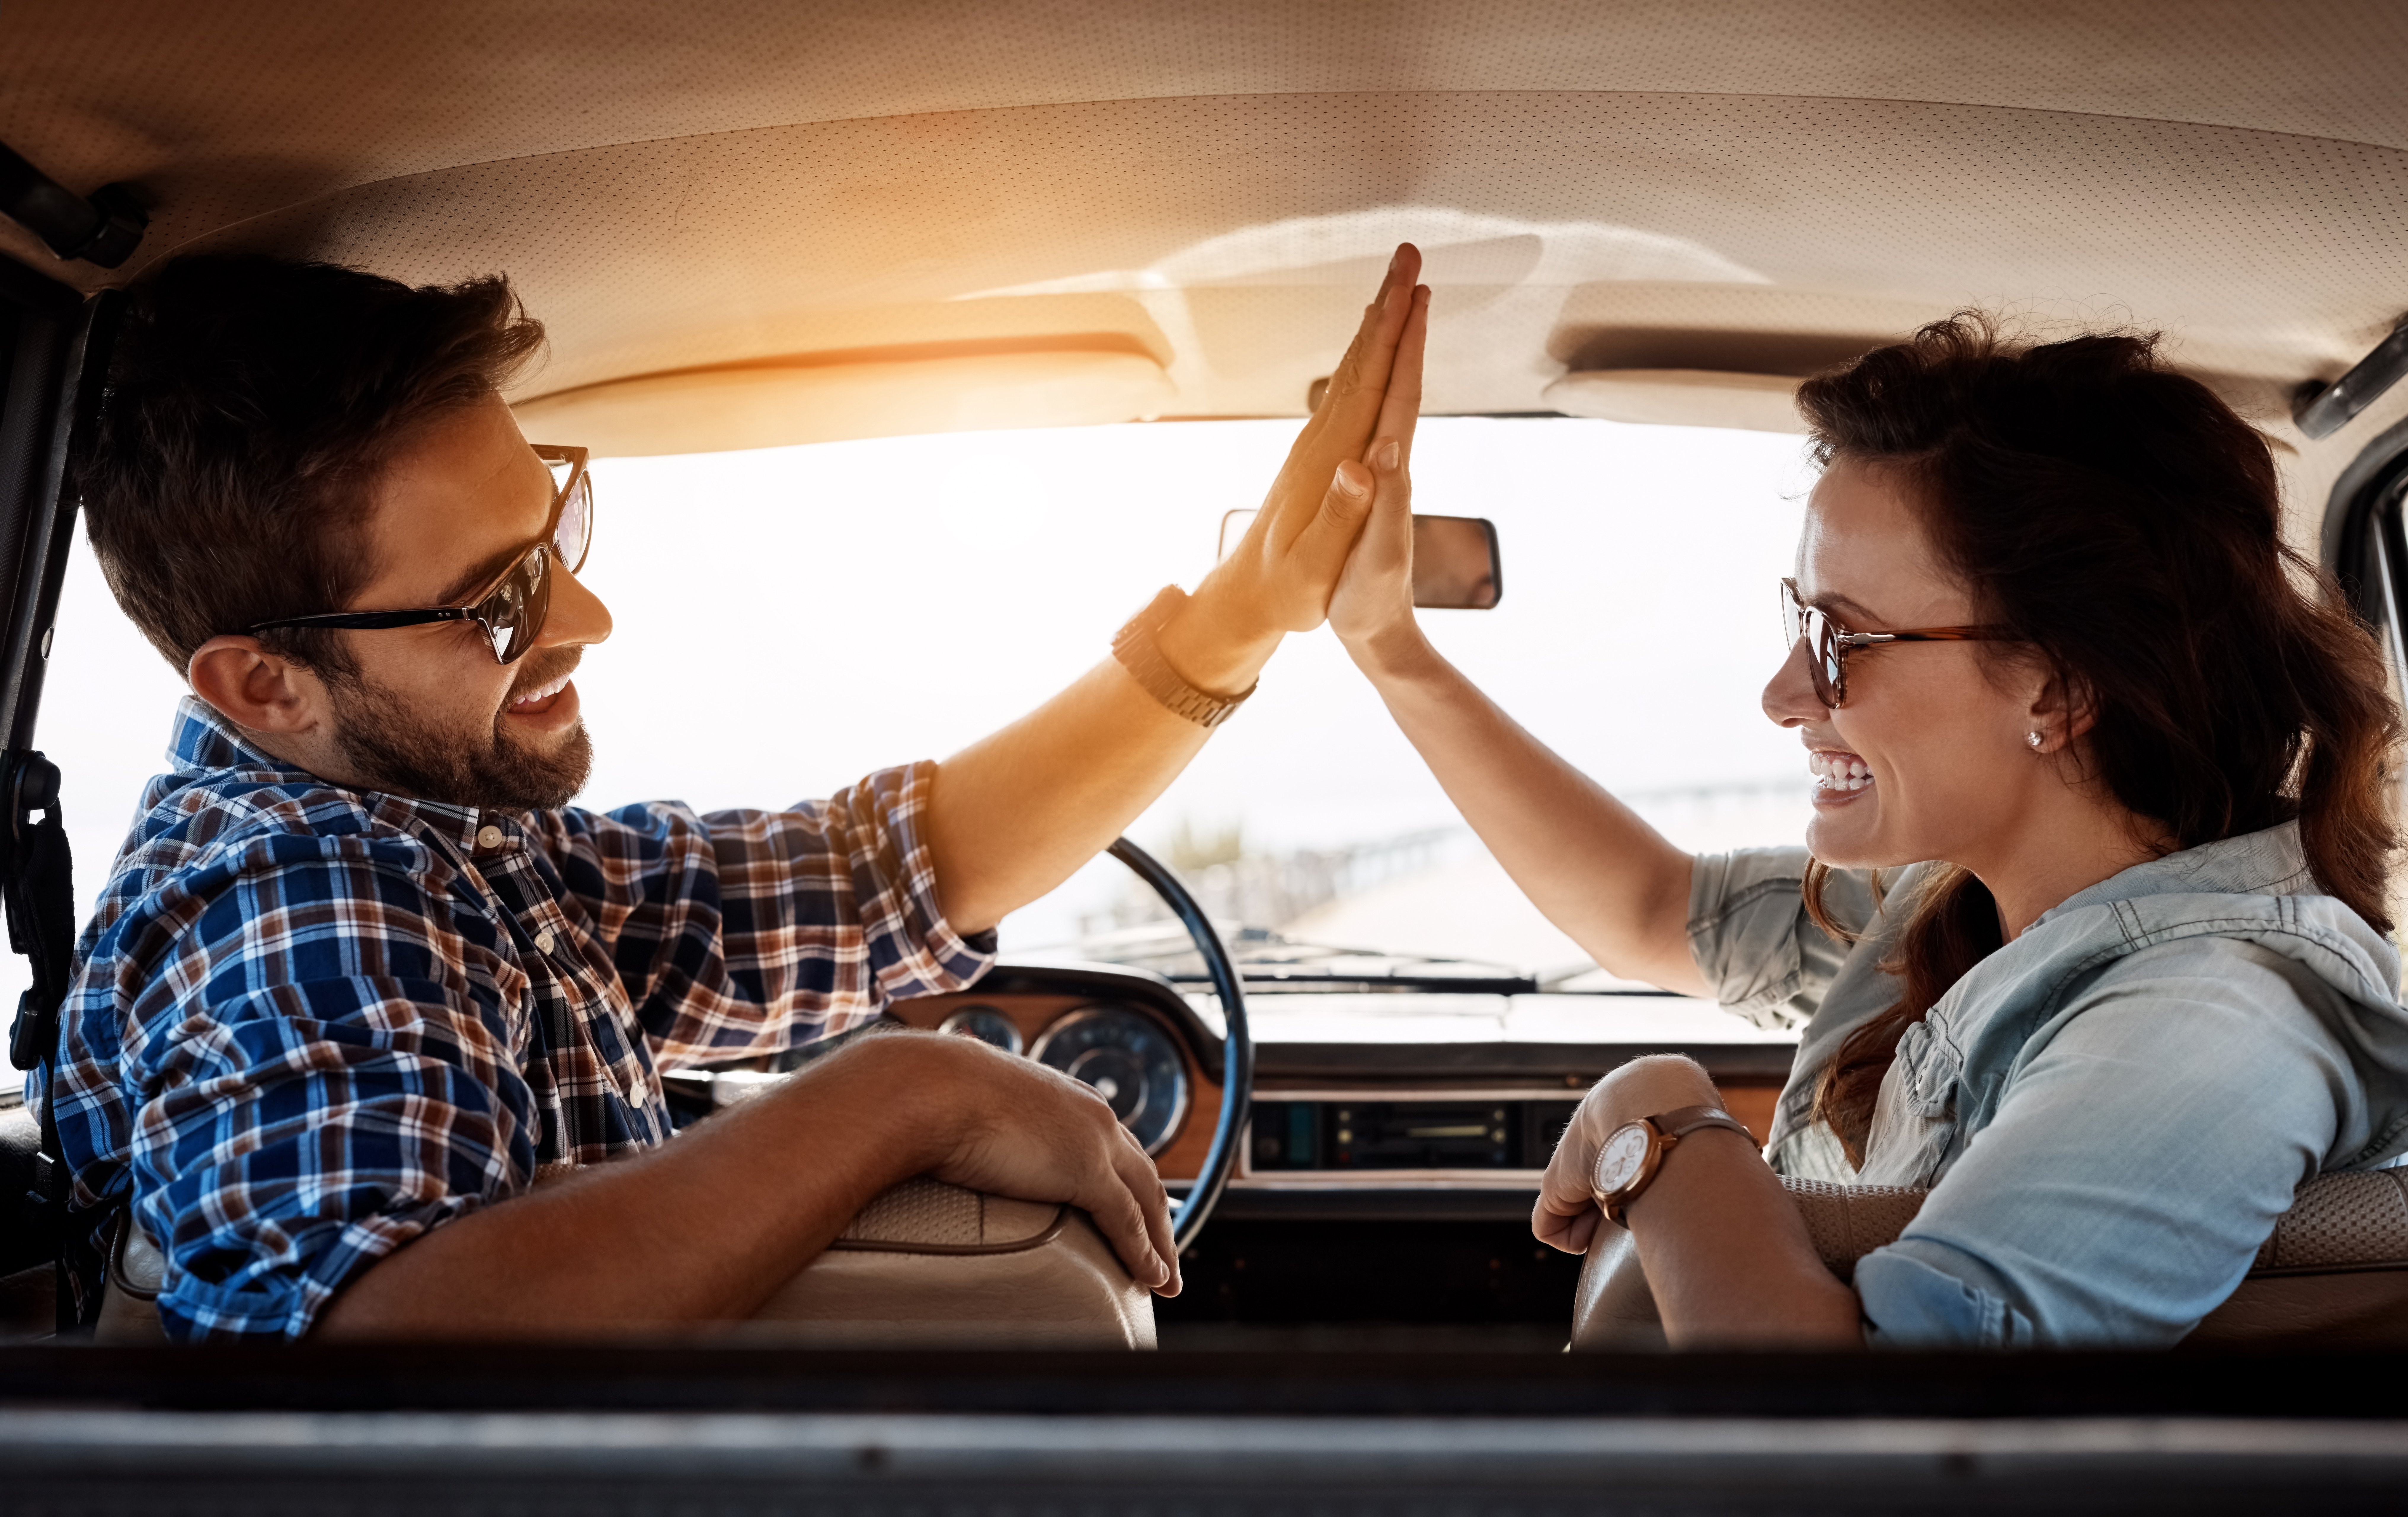 0% Auto Loan Might Not Be the Best Deal